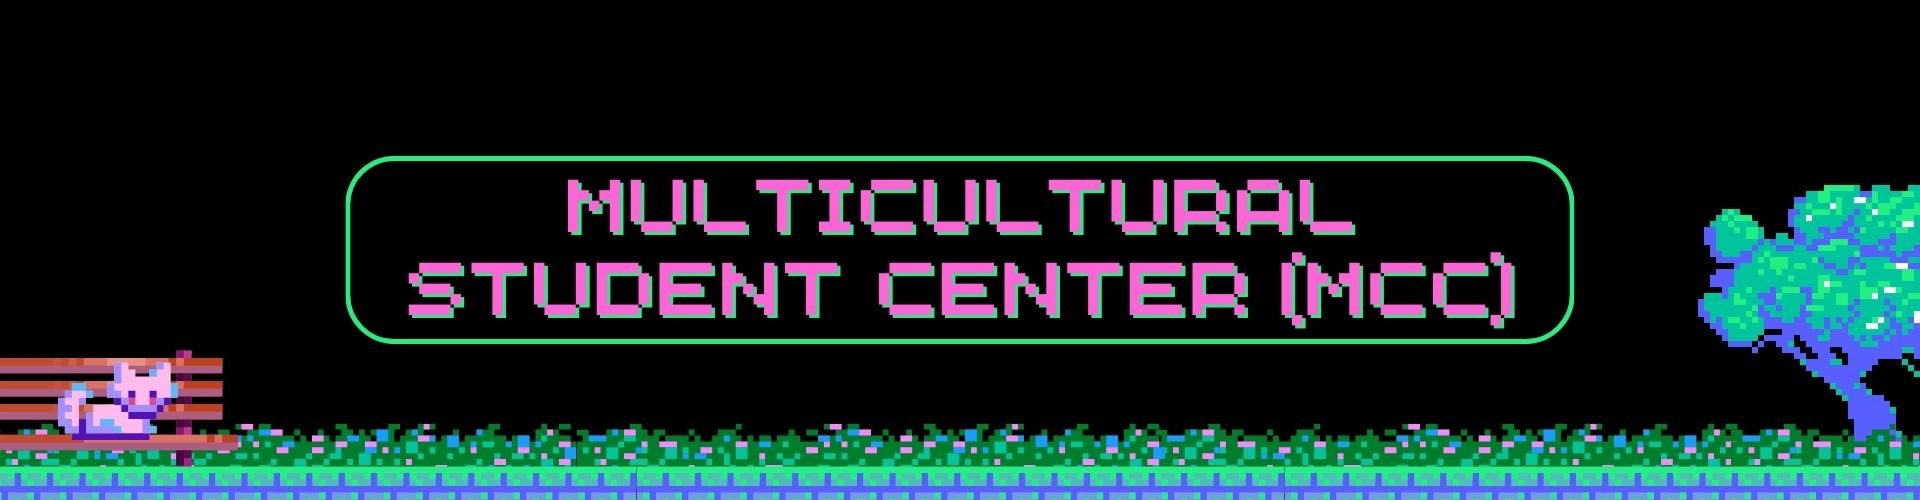 Pink "Multicultural Student Center" 8-bit text against black with 8-bit grass and block on the bottom with an 8-bit cat on a bench on the left corner and an 8-bit tree on the right 